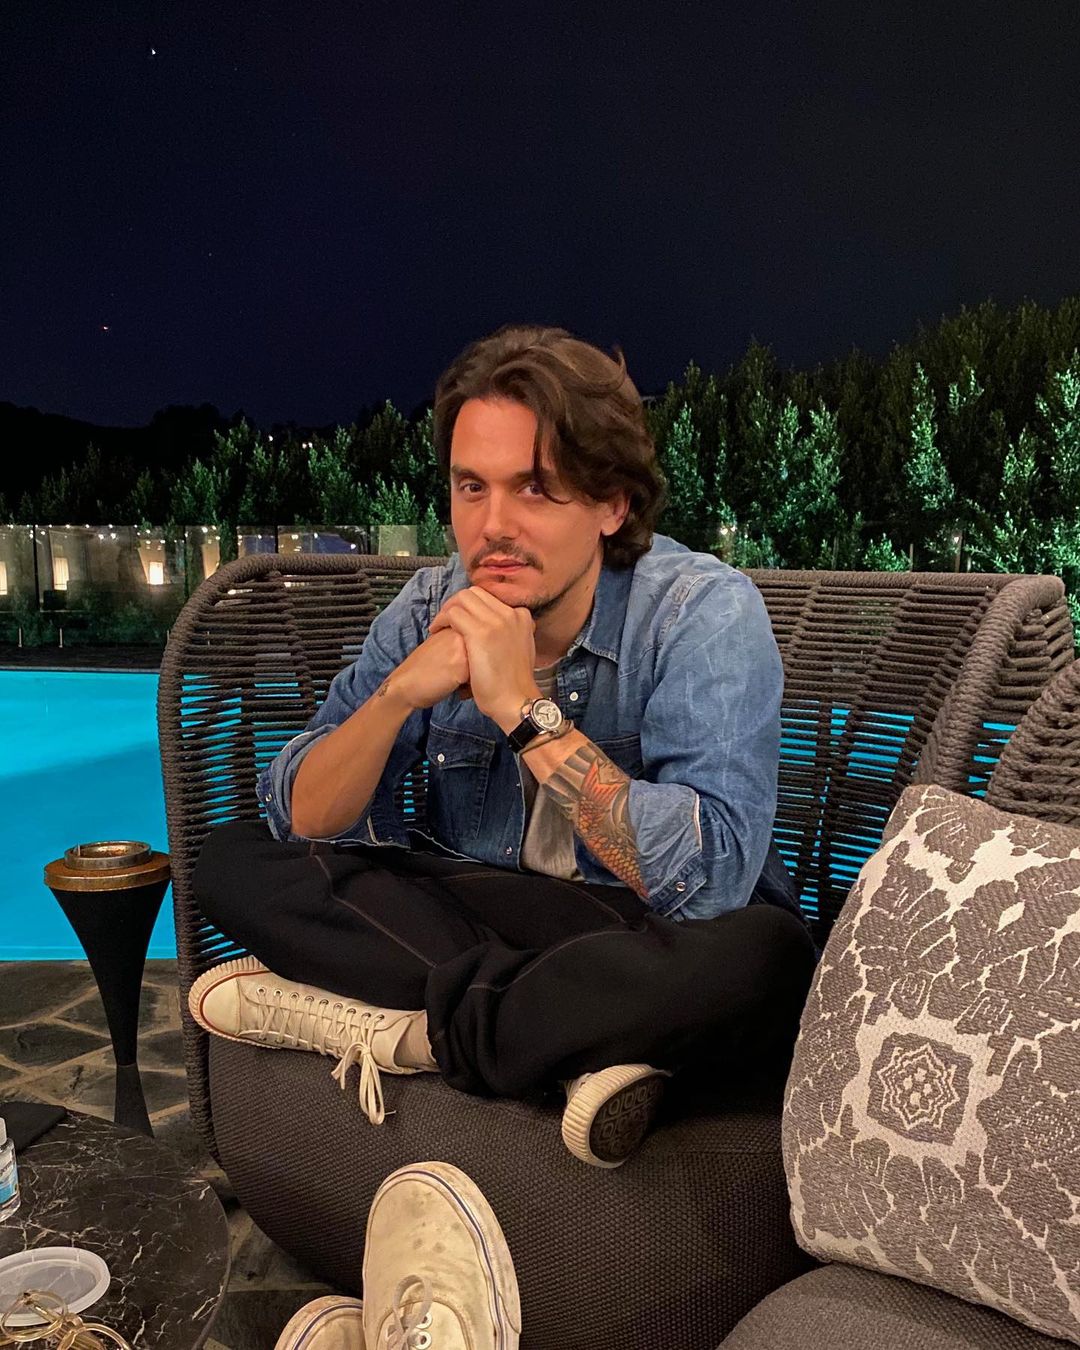 A photo showing John Mayer sitting on a couch by a pool, with his legs tucked in and his hands rested on his lower chin.